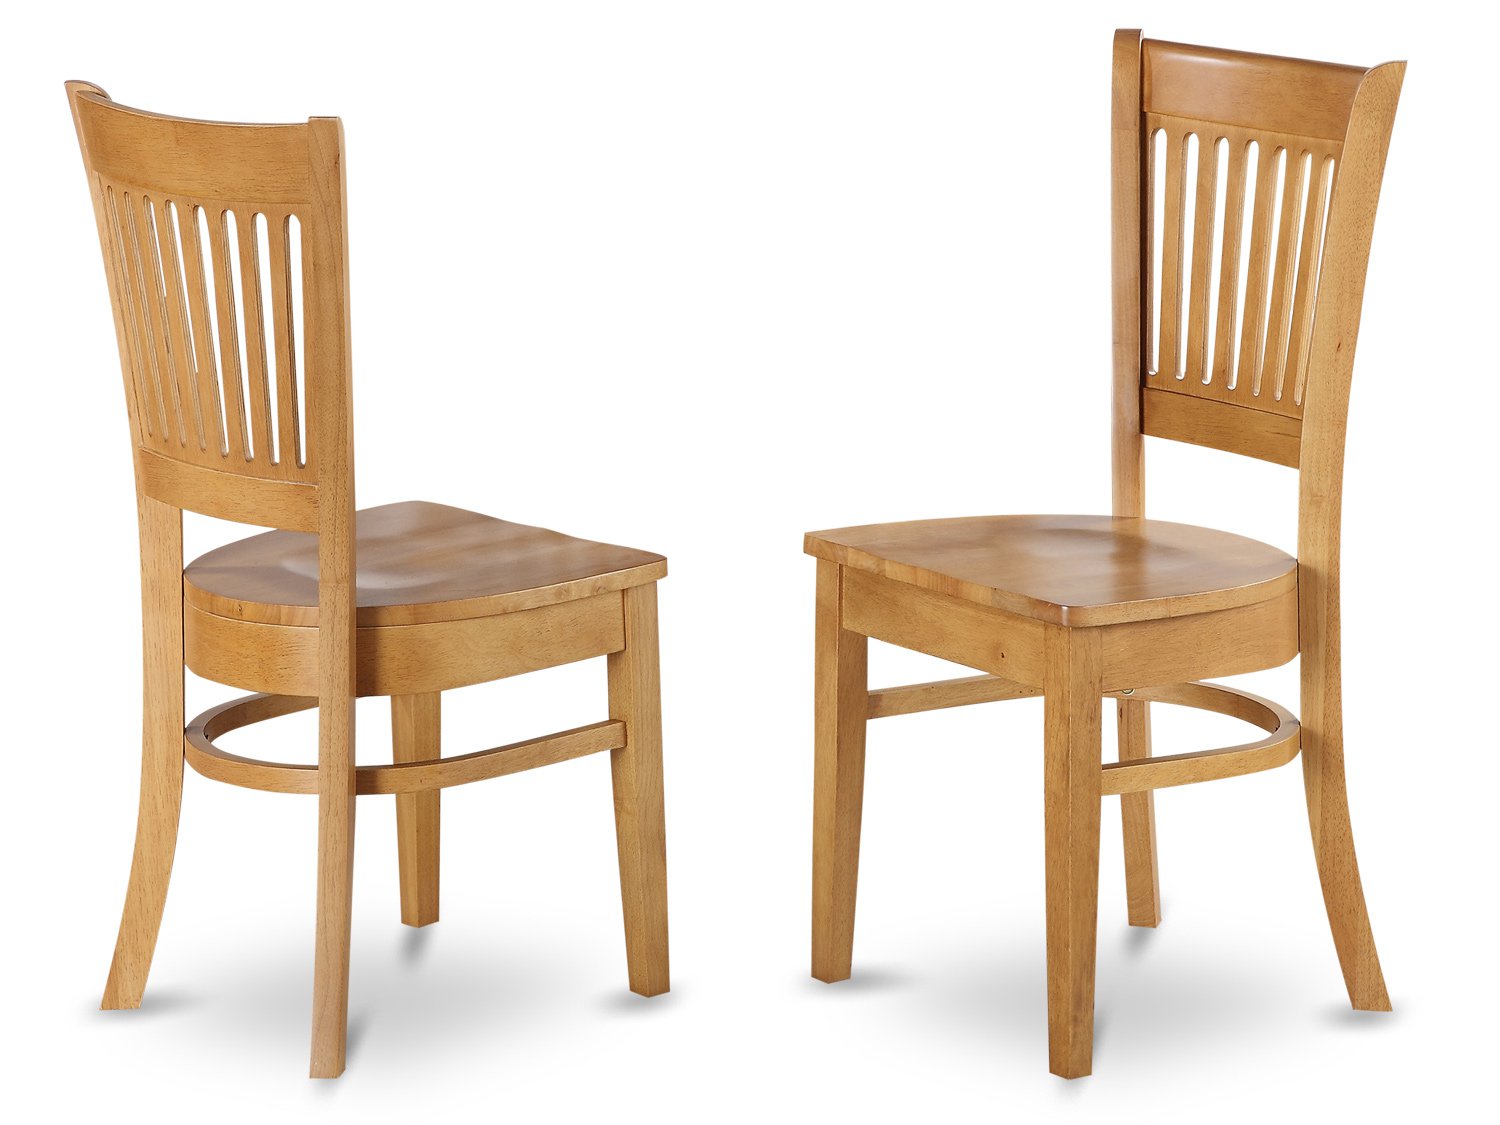 Wooden Dining Room Chairs From Walmart